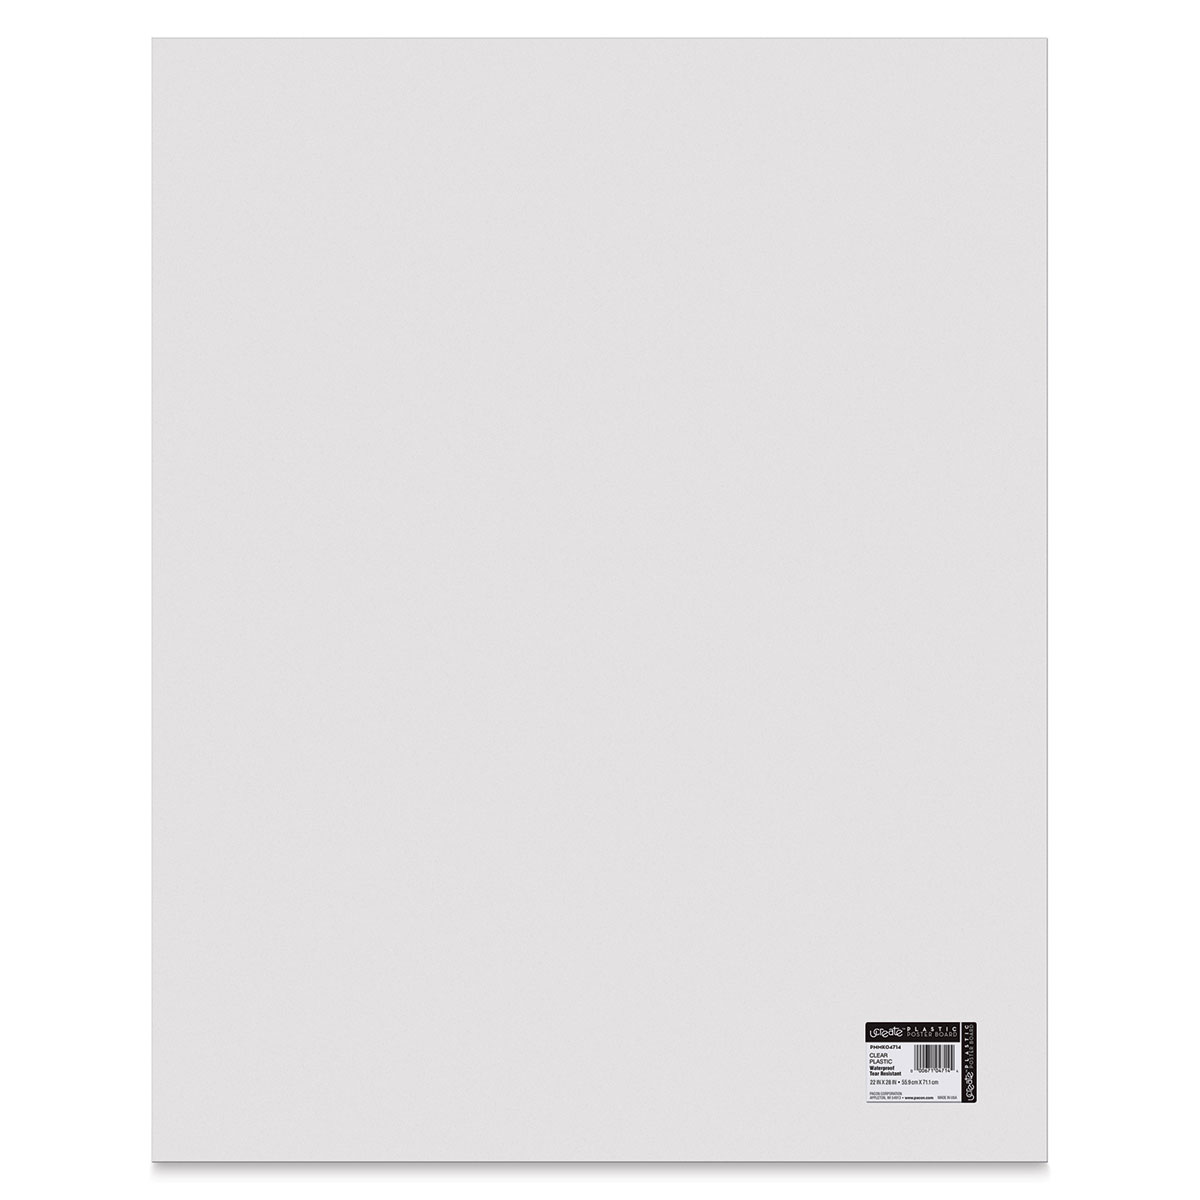 Posterboard 11x14 White 5ct,Pacon Corporation,5417